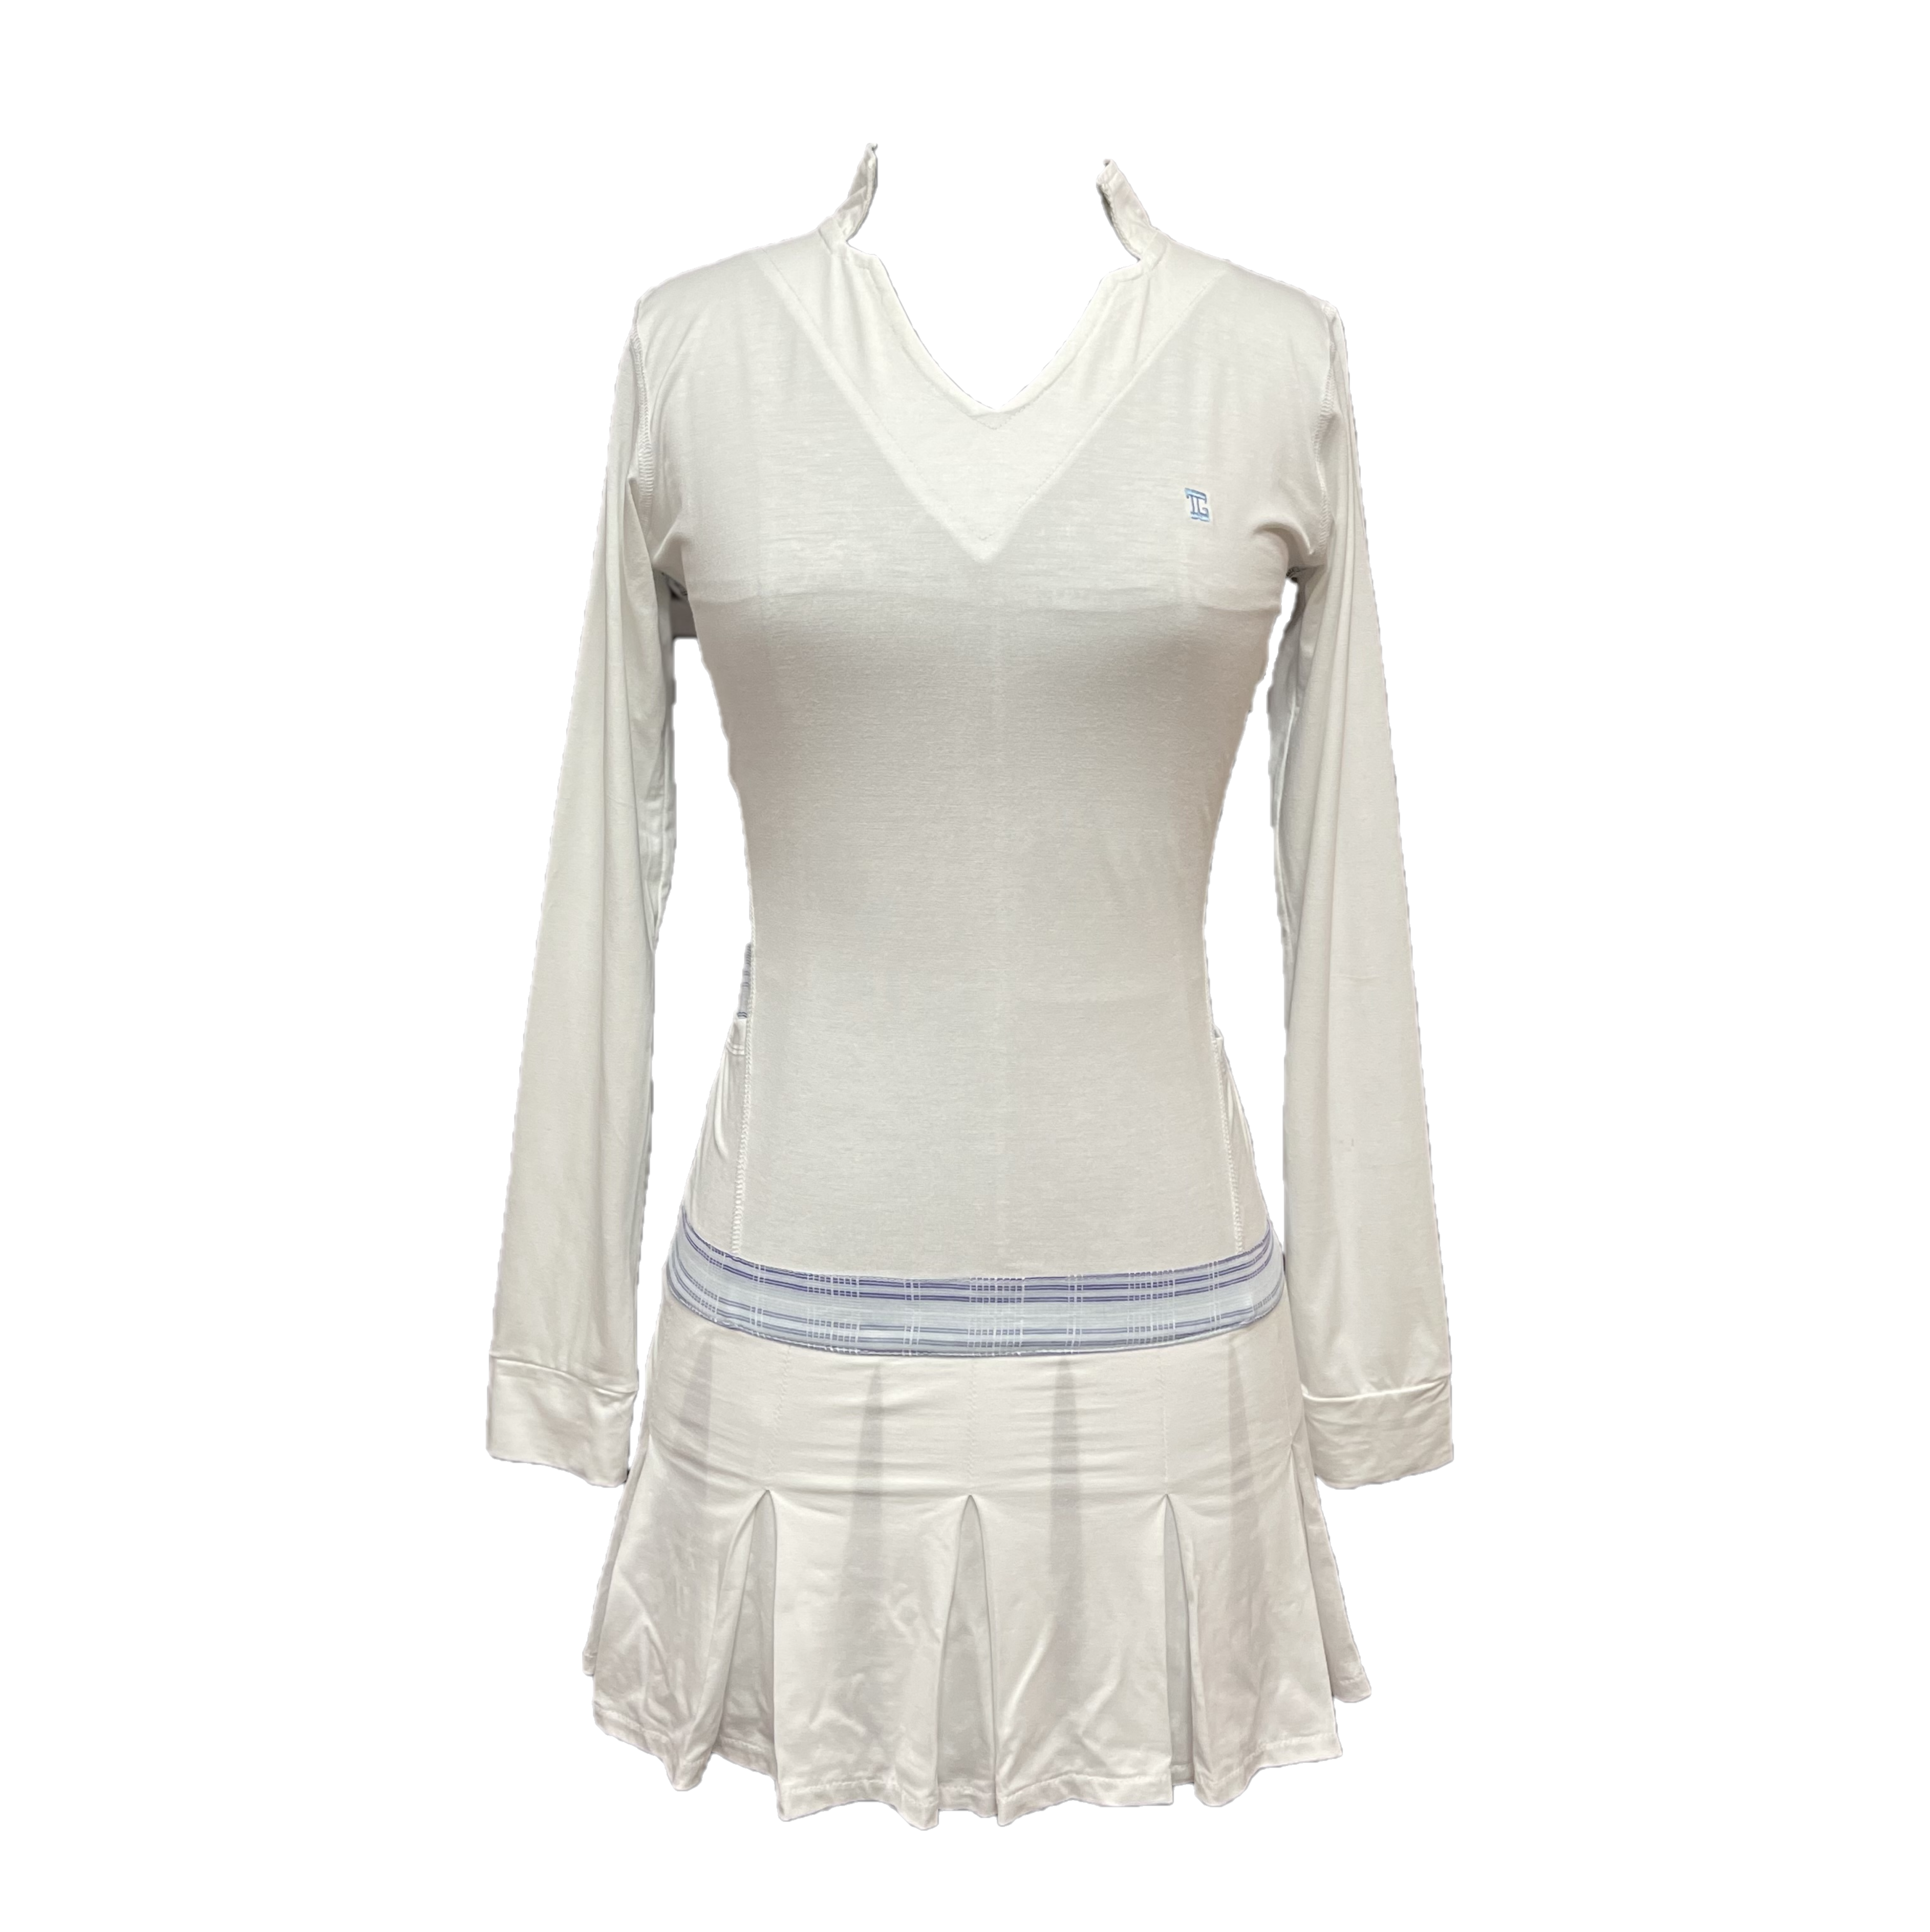 GD-027A || Golf Dress White, Open V Neck Mandarin Collar Pleated Swing Hem with White, Blue, Black & White Horizontal & Vertical Stripes Breathable Underarm and Hip Trim, 2 Side Pockets Long Sleeve